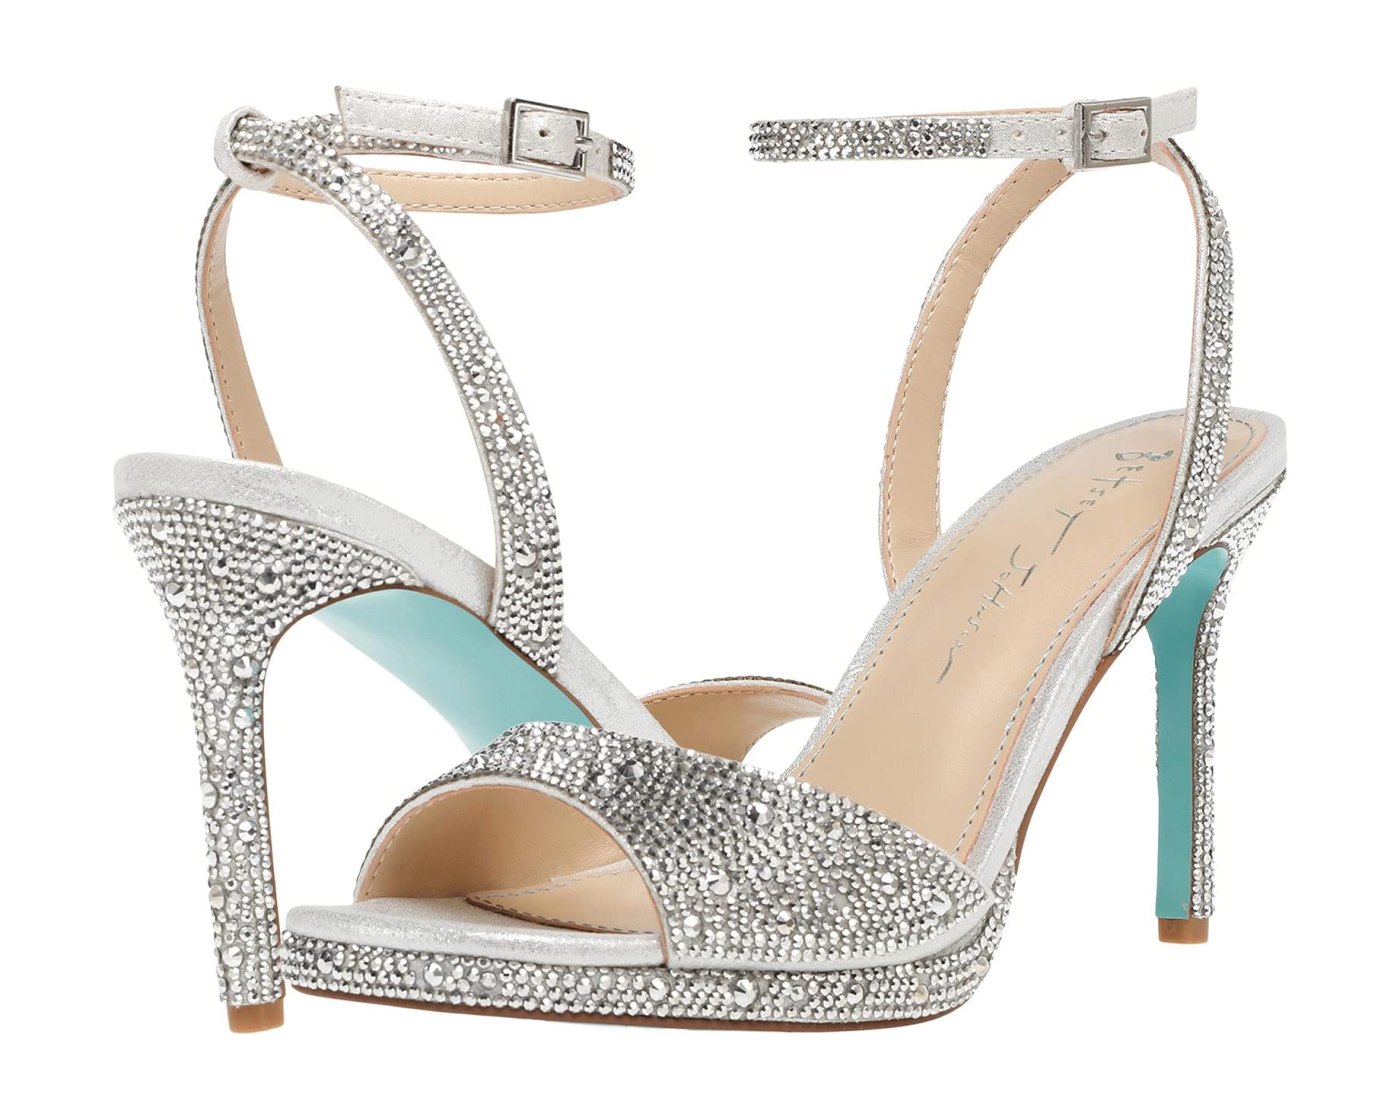 Shop These 9 Sparkly Shoes for New Year's Eve — Up to 50% Off! | UsWeekly